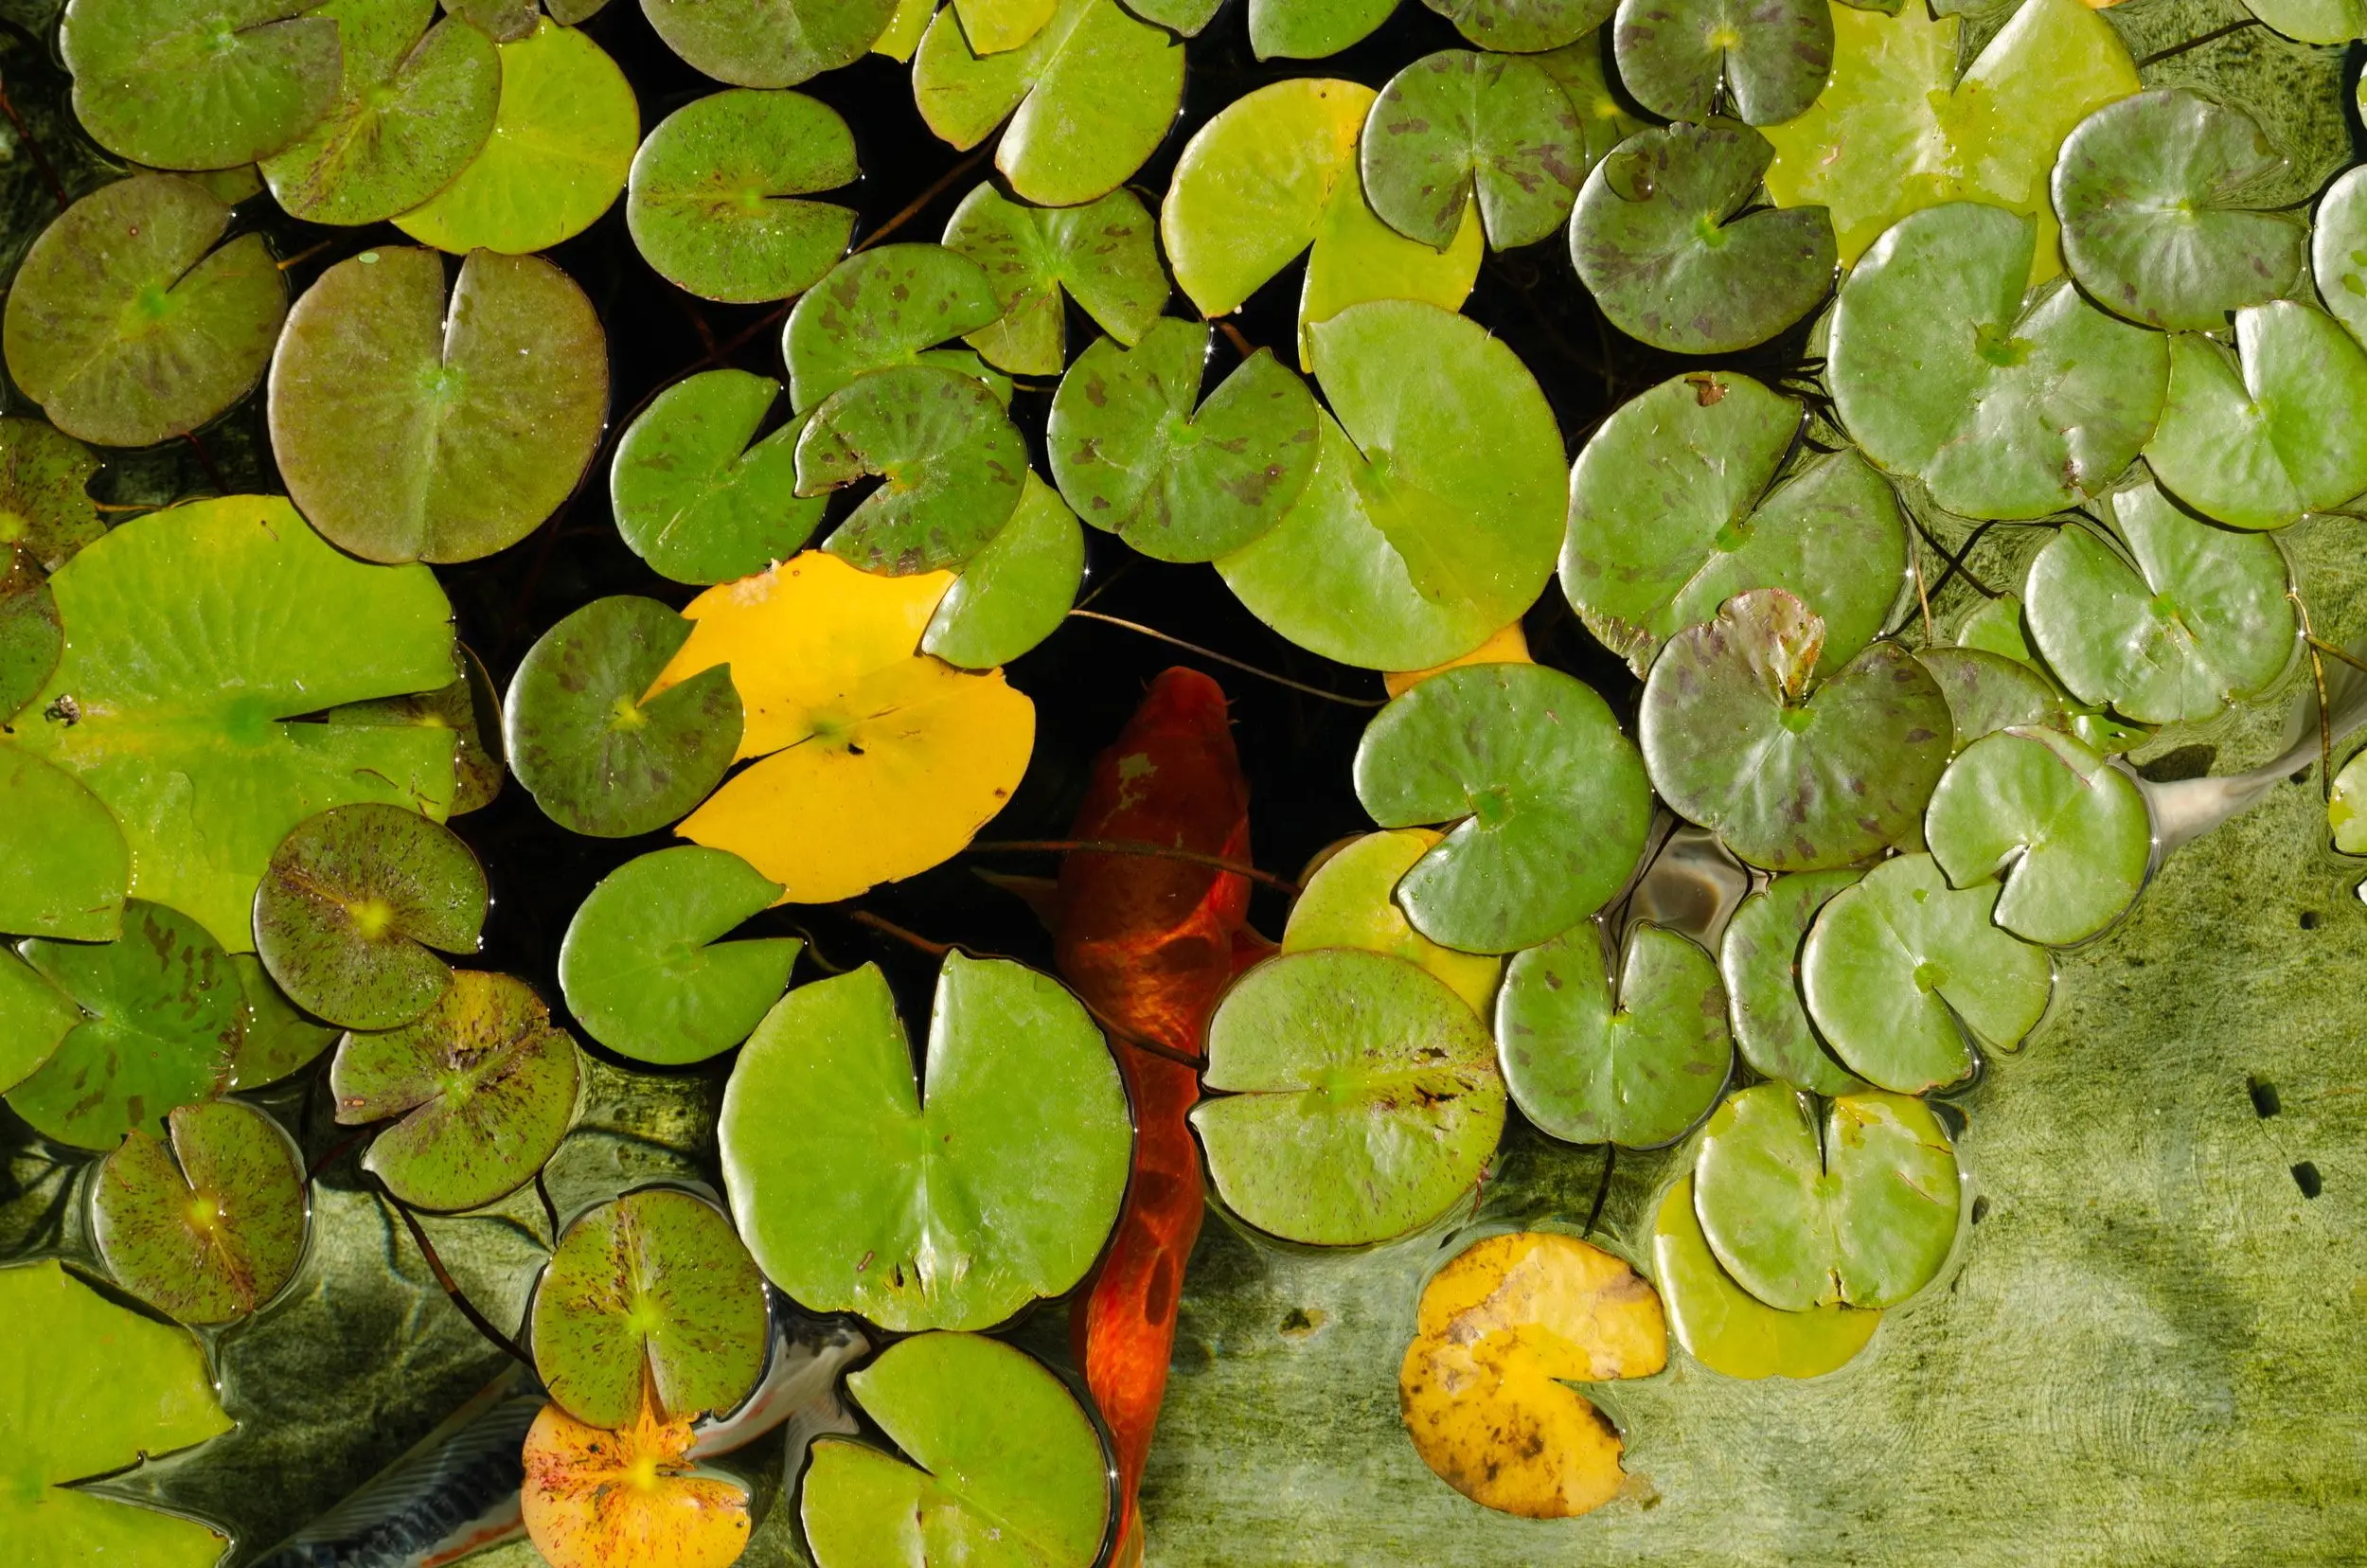 A red-orange koi fish swims underneath green and yellow lily pads.